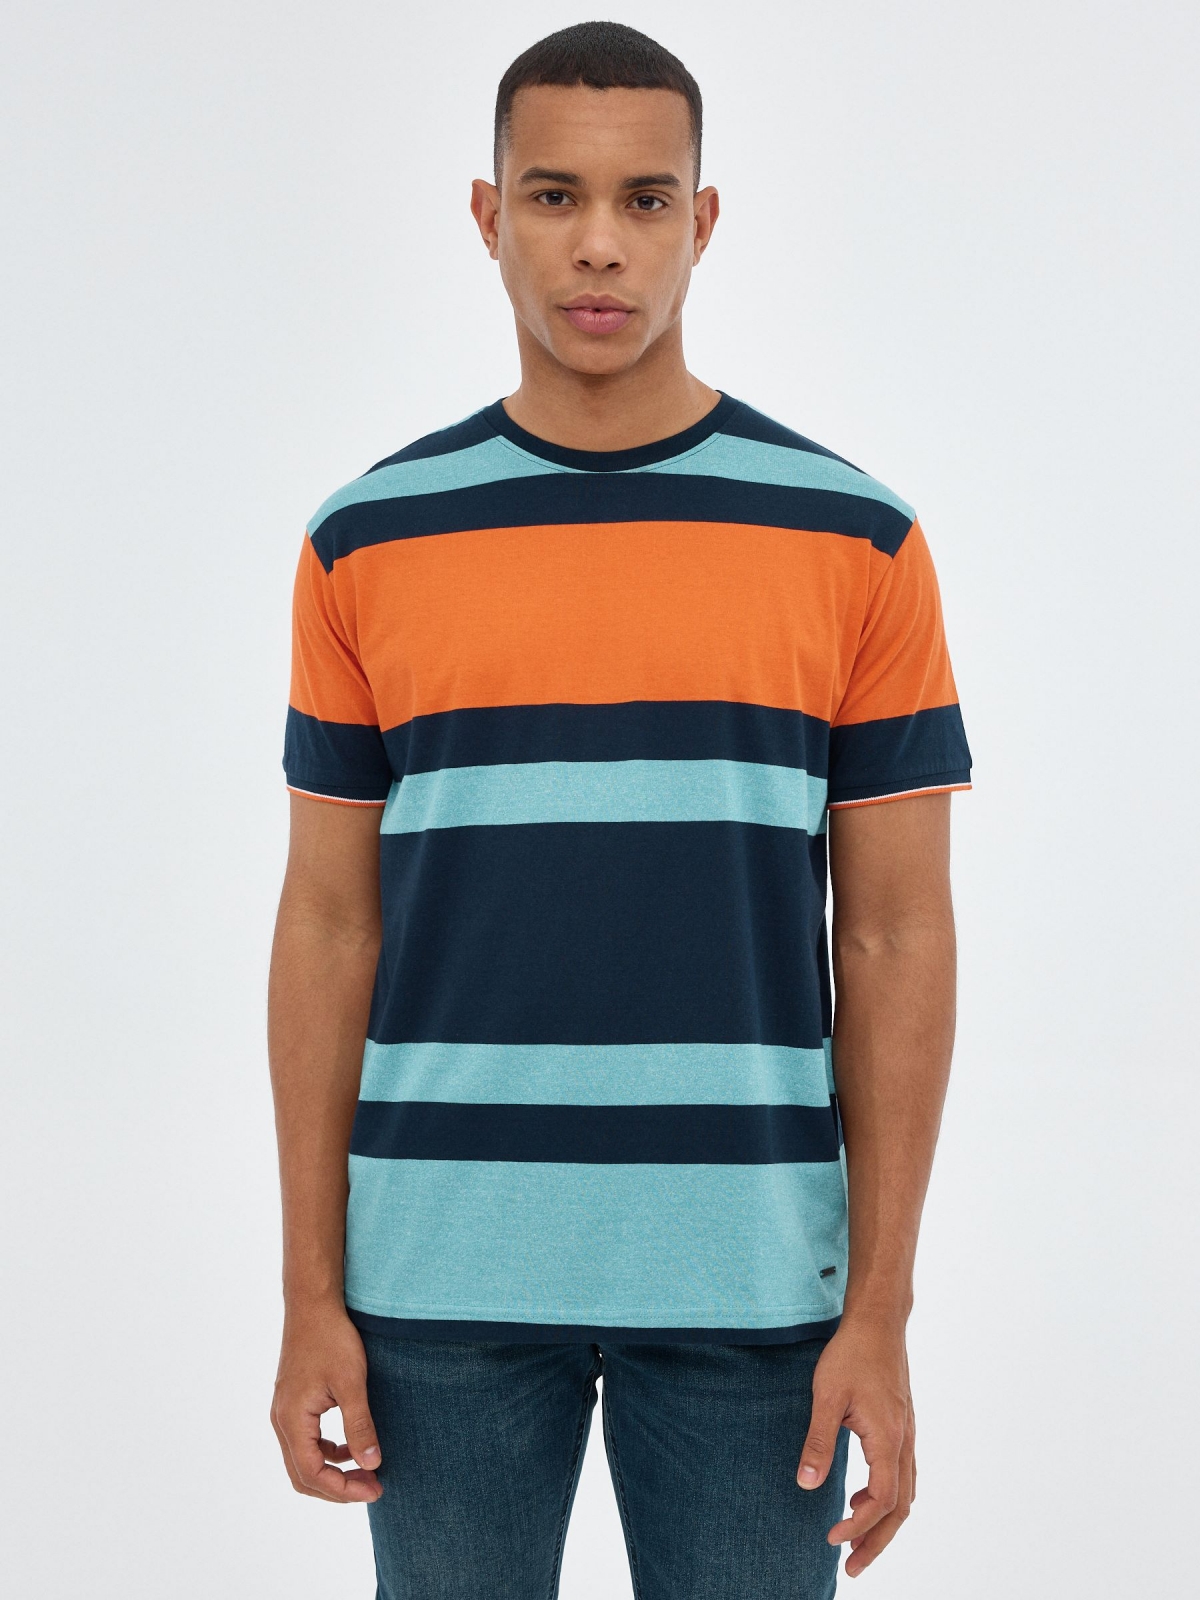 Blue and orange striped T-shirt blue middle front view